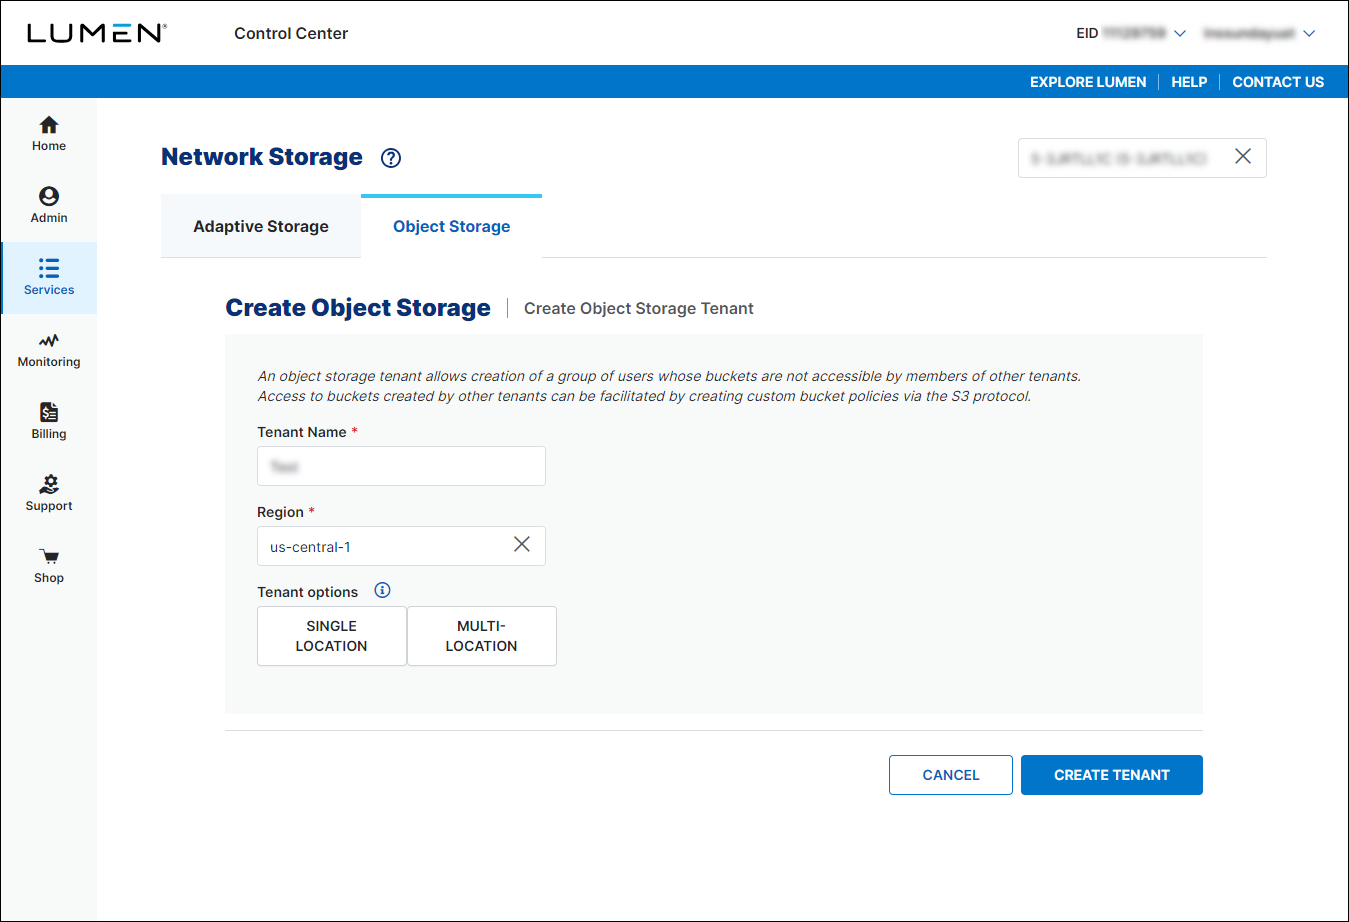 Object Storage (showing Create Tenant with region selected)